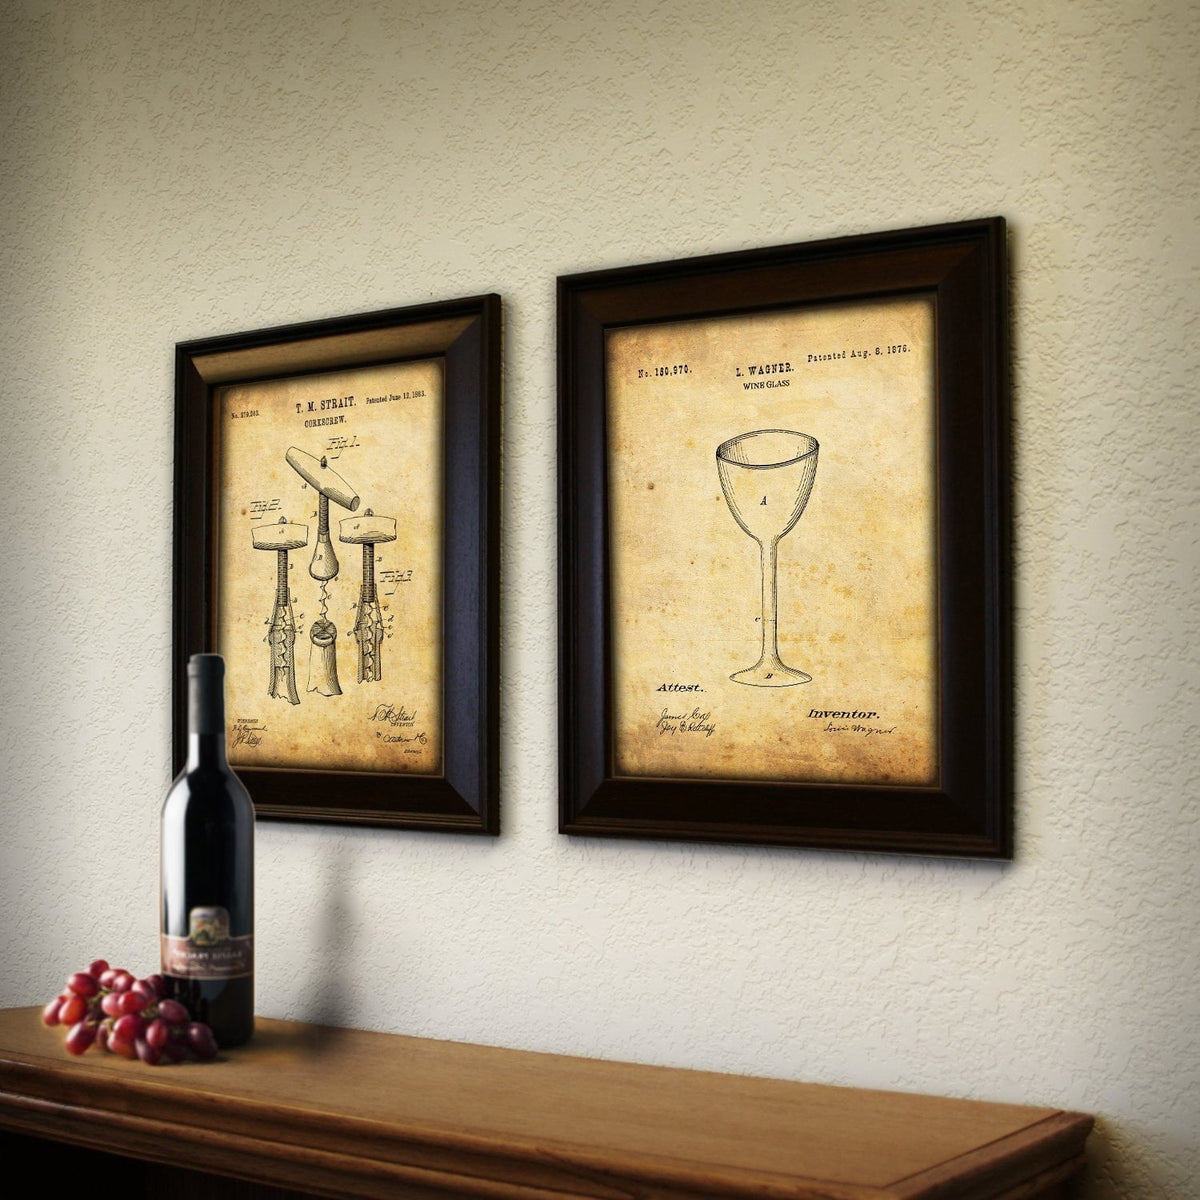 US Patent drawing art Wine glass decor from Personal-Prints